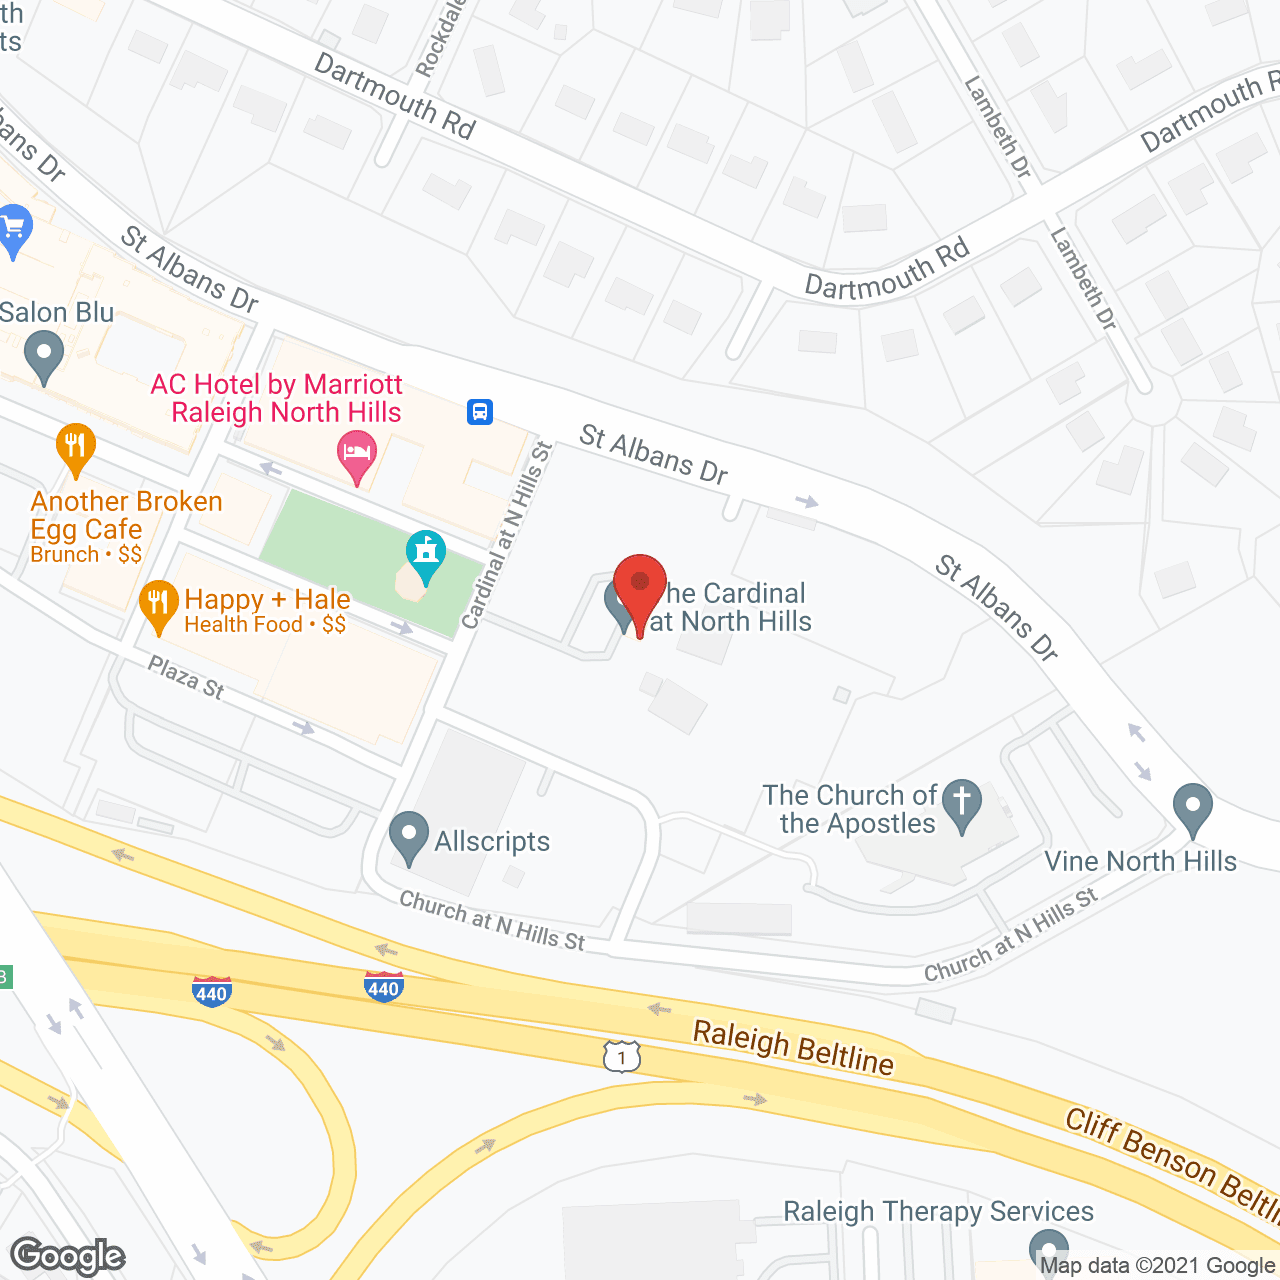 The Cardinal at North Hills in google map